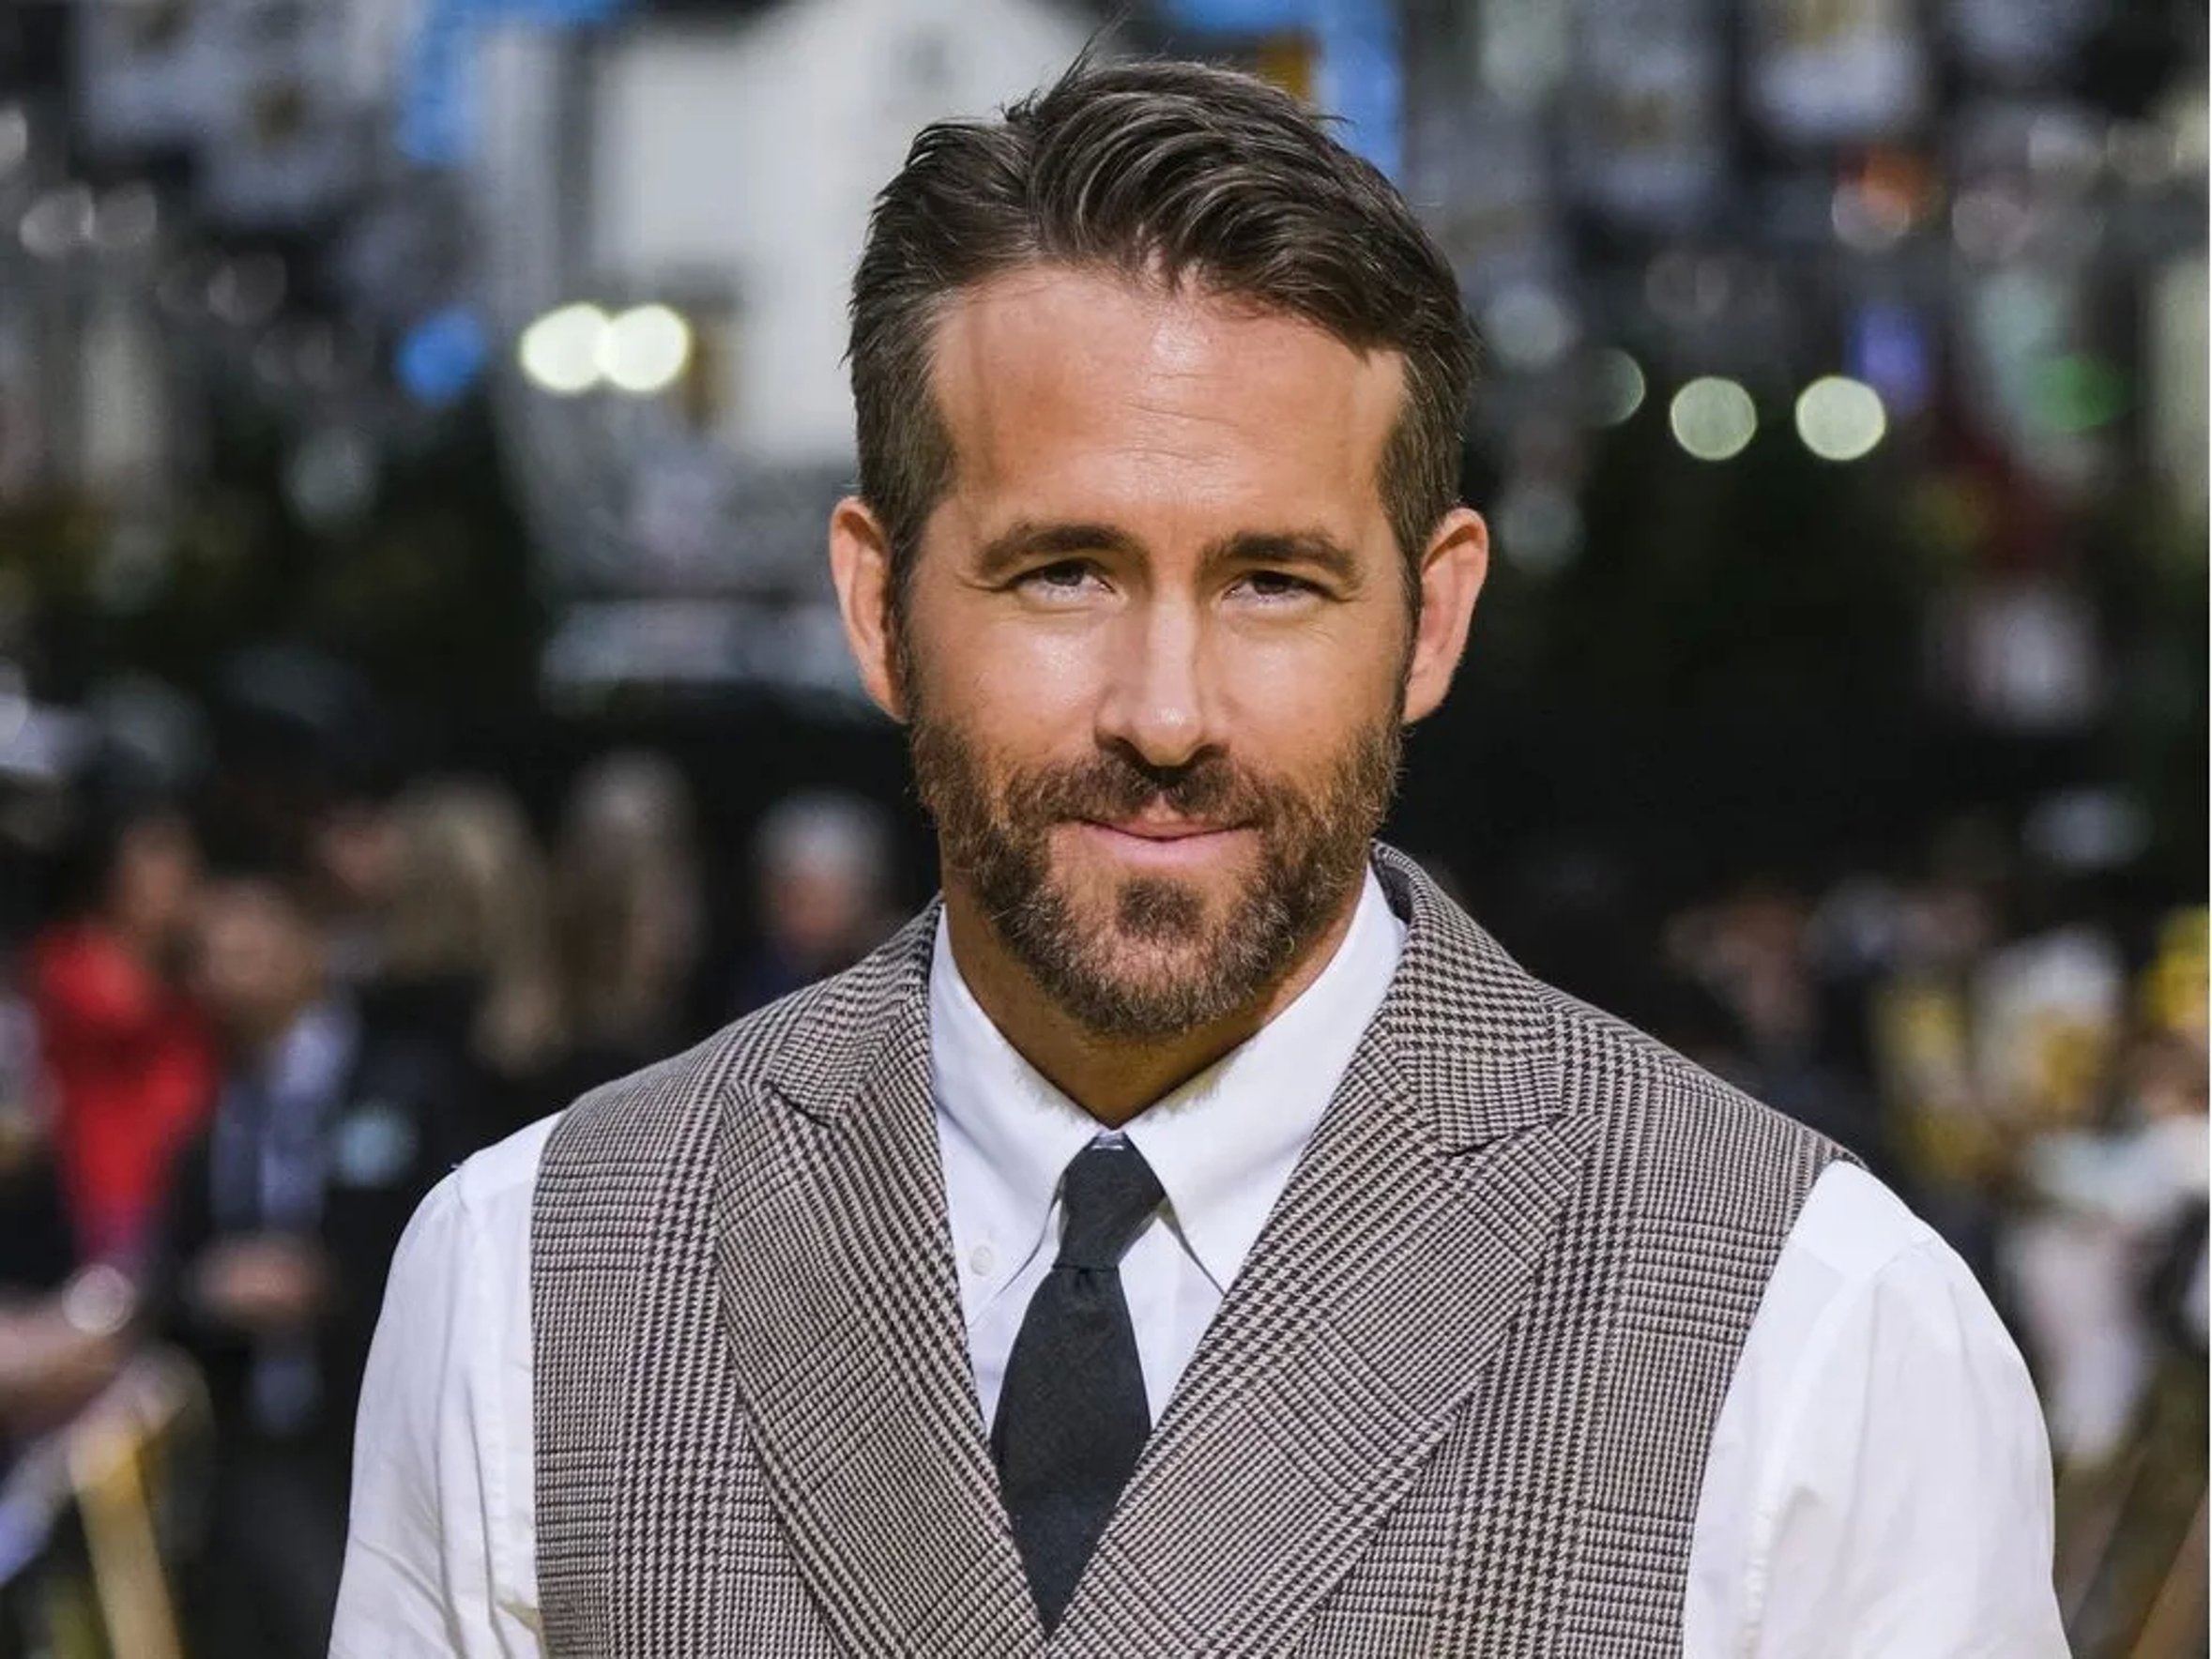 Ryan Reynolds Shares Why He Chose To Speak Out About His Struggles With Anxiety